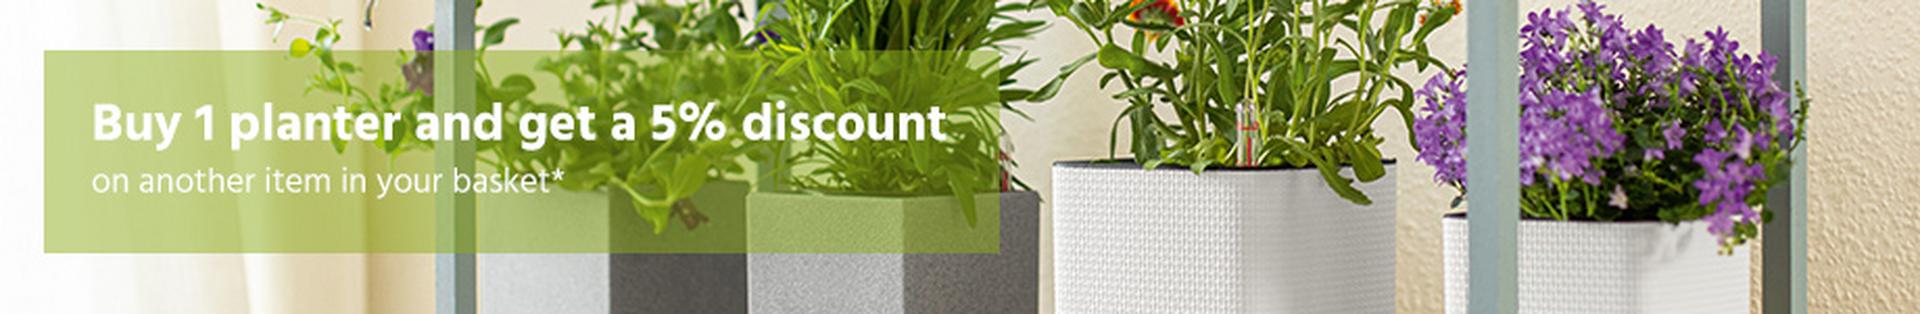 Buy 1 planter and get a 5% discount on another item in your basket